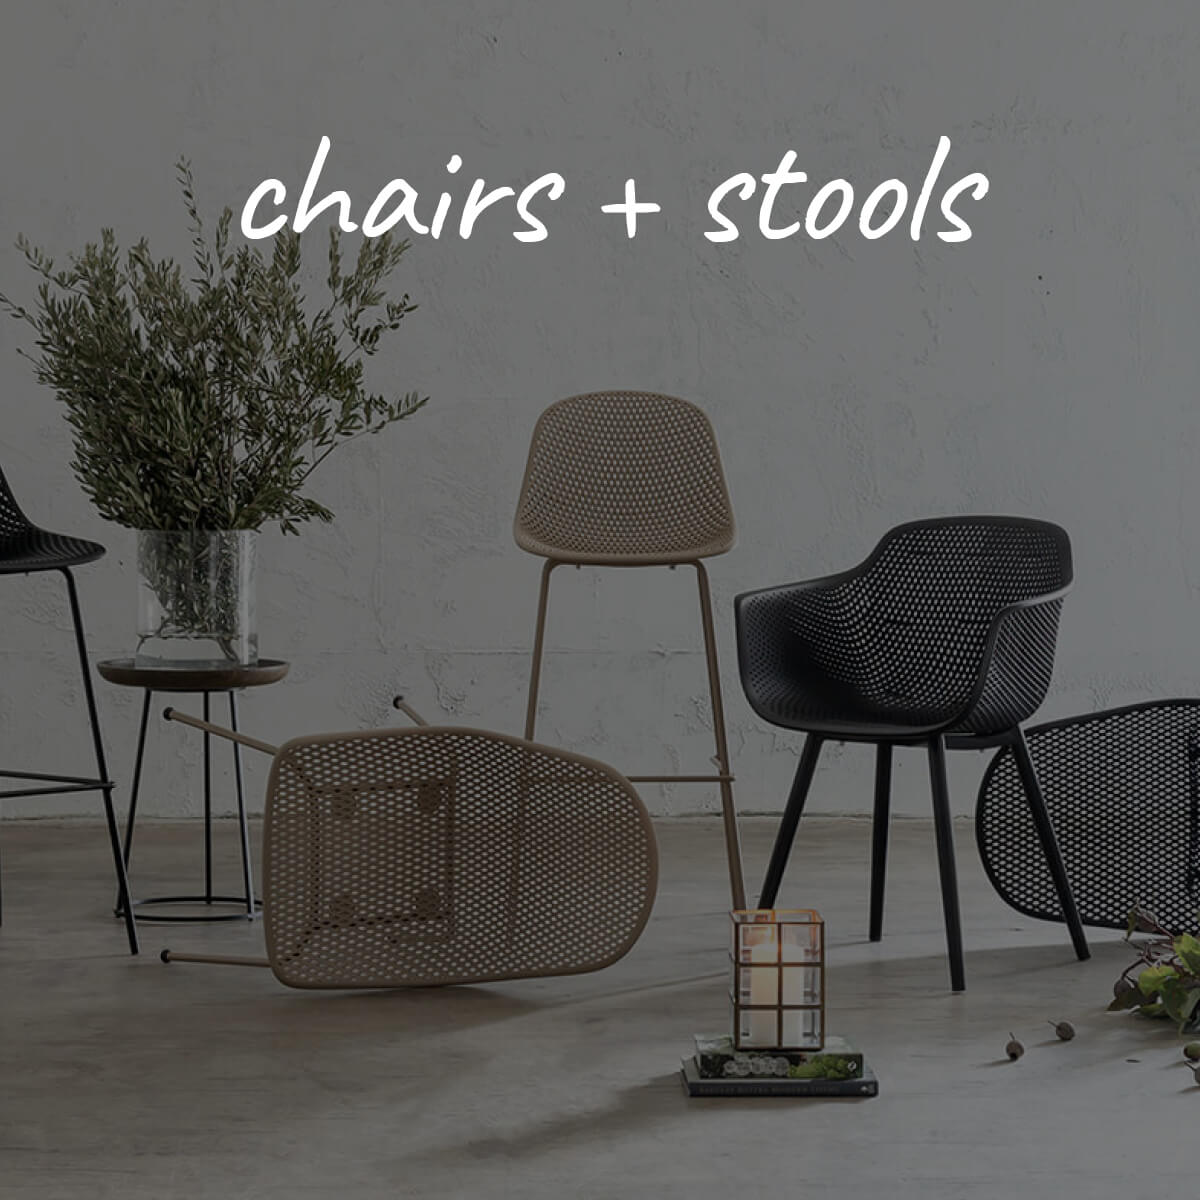 OUTDOOR CHAIRS + STOOLS